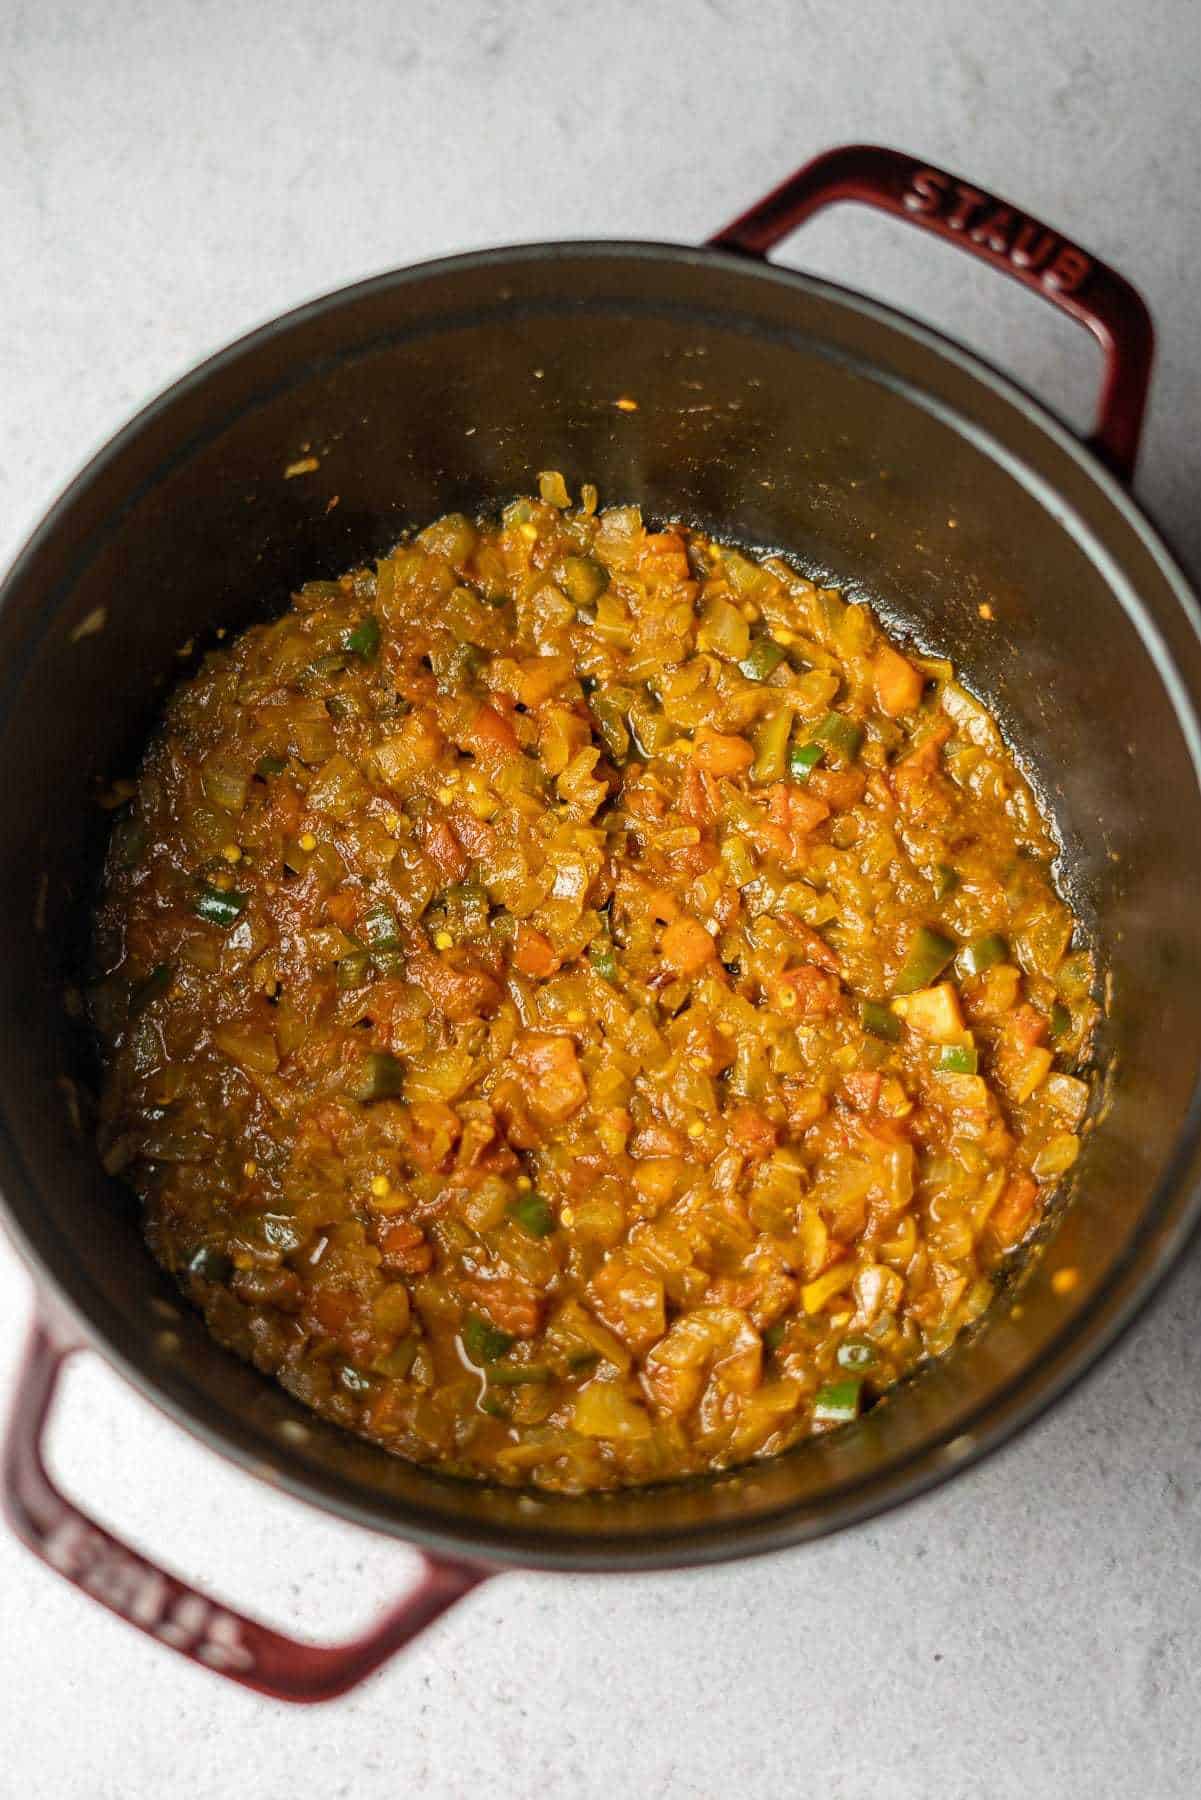 cooked down bhuna masala in staub cocotte